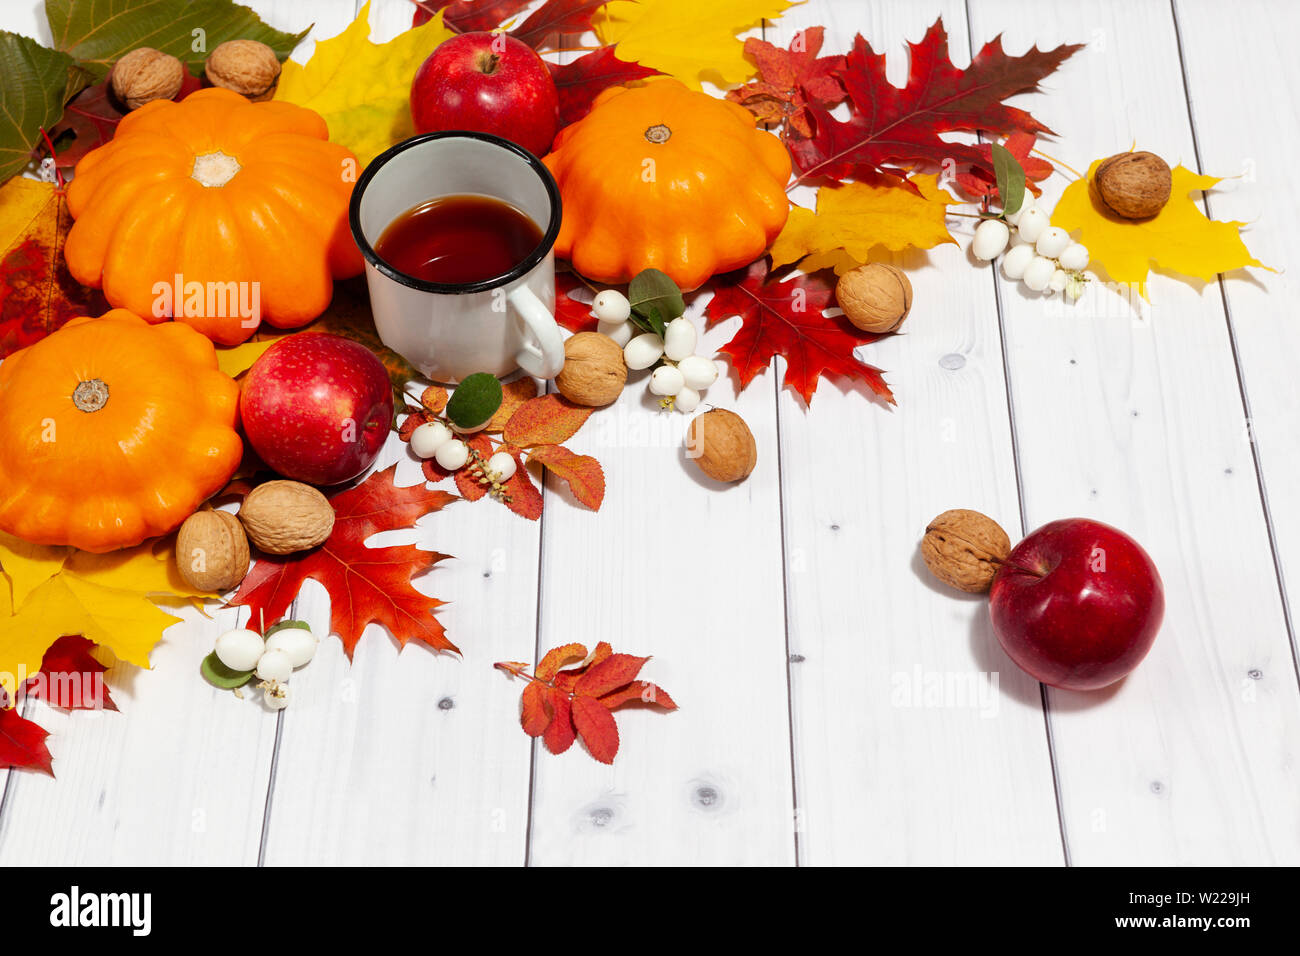 Bright fall horizontal background with orange pumpkins and red apples, nuts,cup of tea,green and yellow leaves,lying on the white desk wood with empty Stock Photo